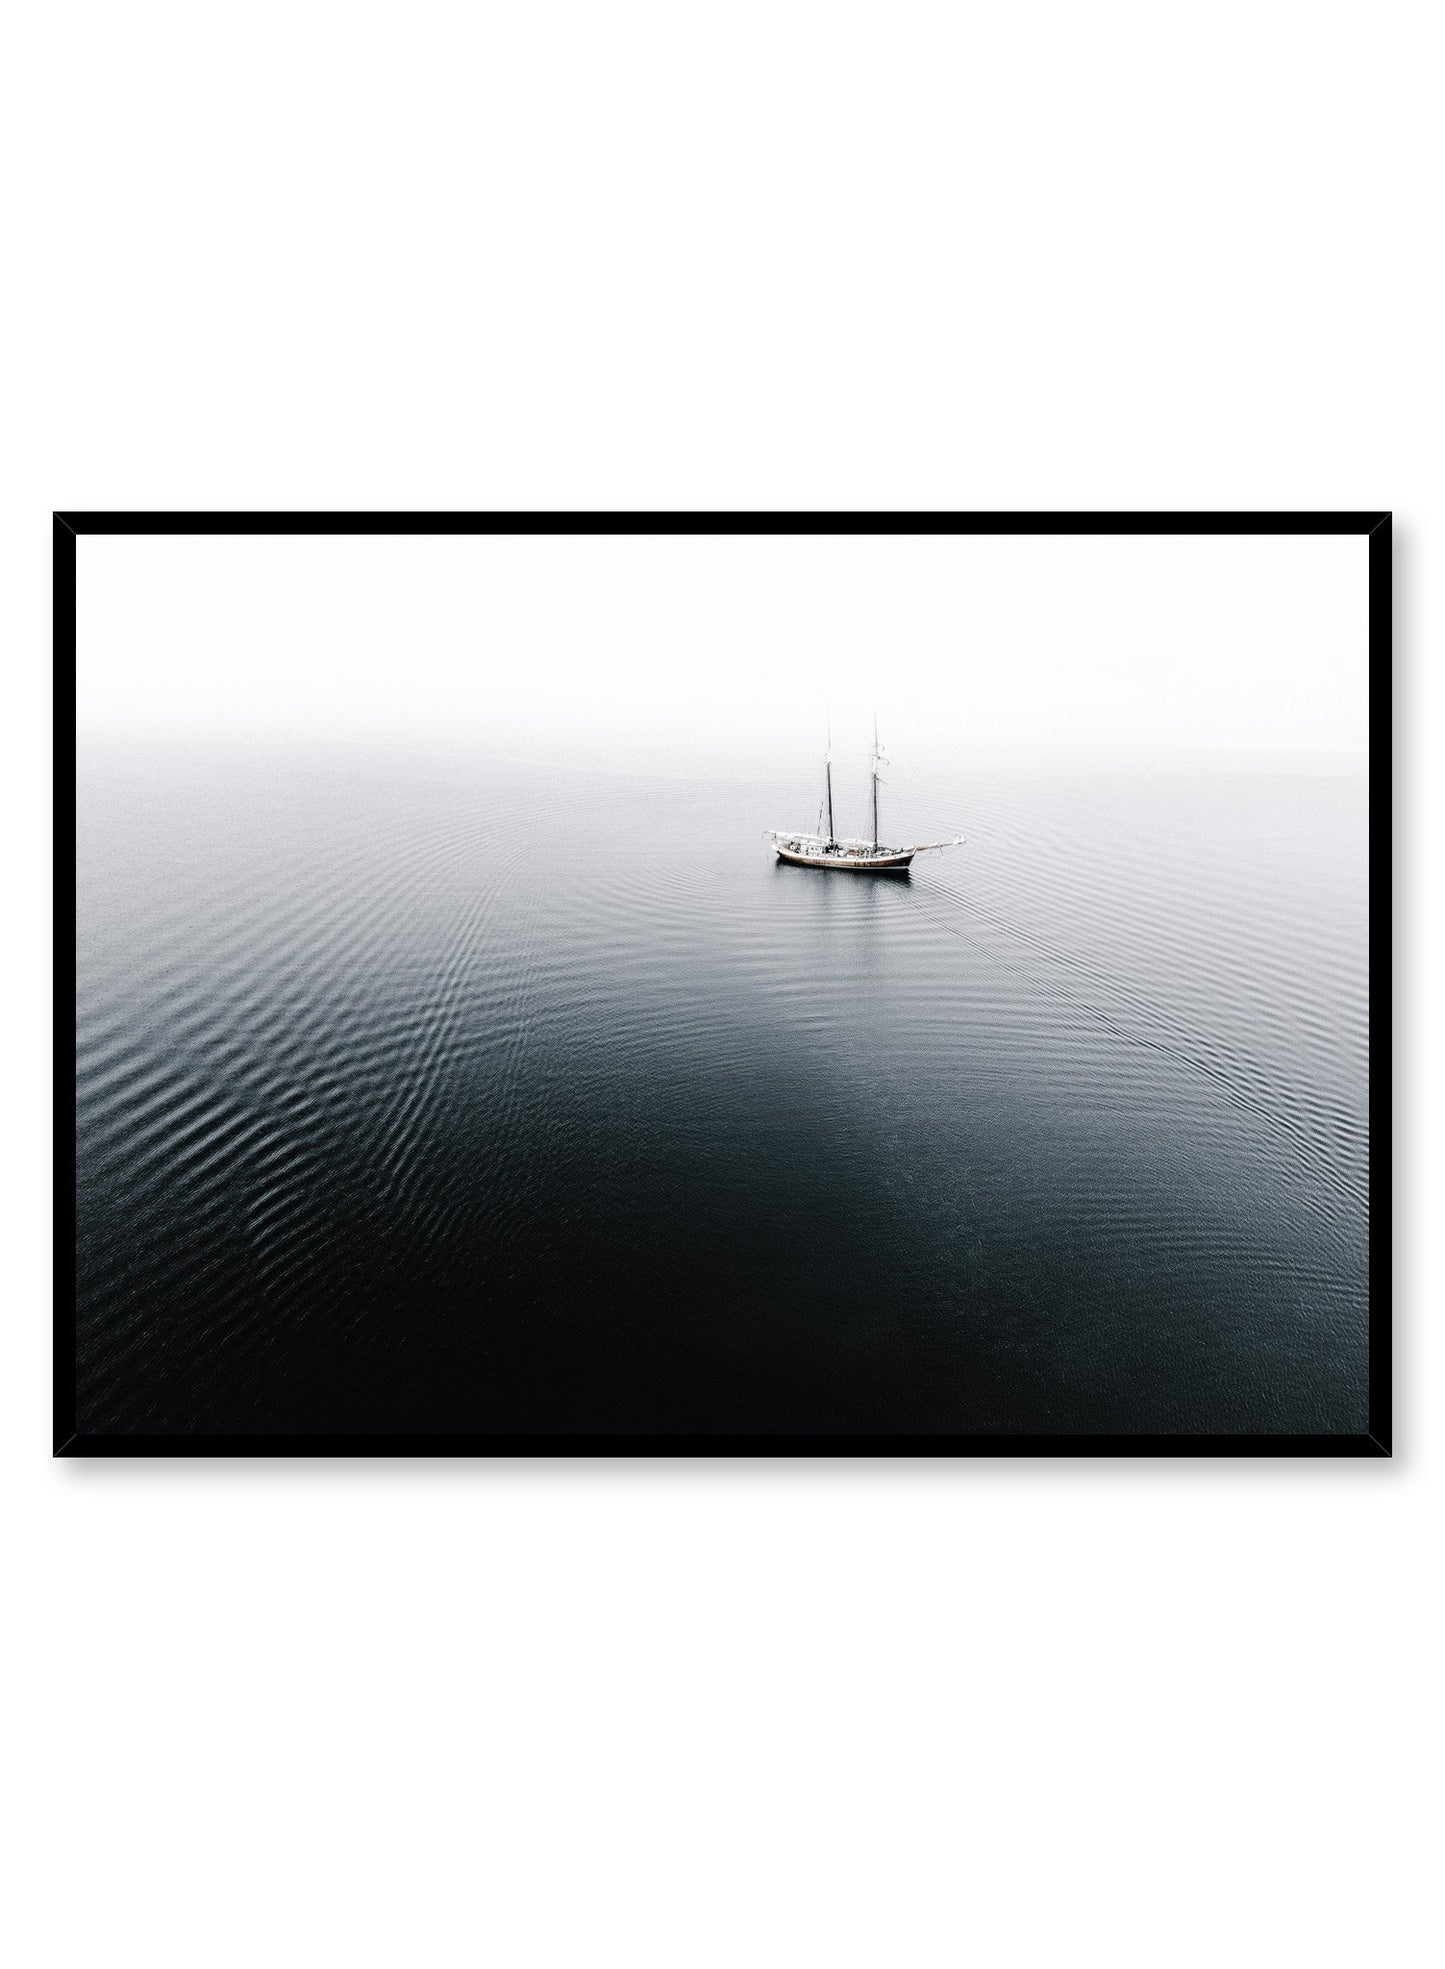 Minimalist design poster by Opposite Wall with lone ship on water photography